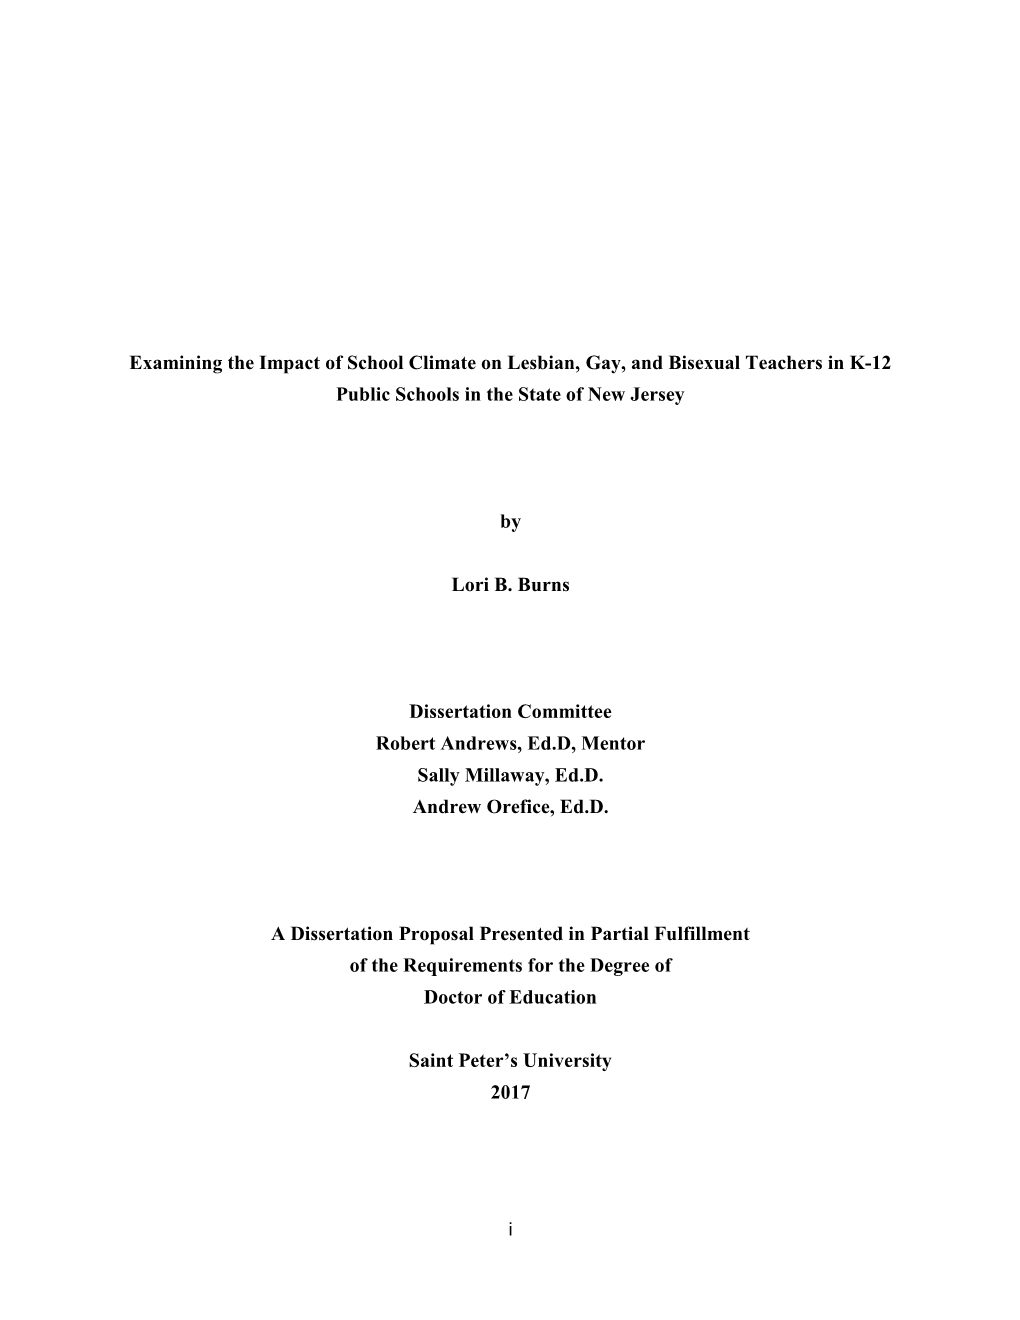 Examining the Impact of School Climate on Lesbian, Gay, and Bisexual Teachers in K-12 Public Schools in the State of New Jersey